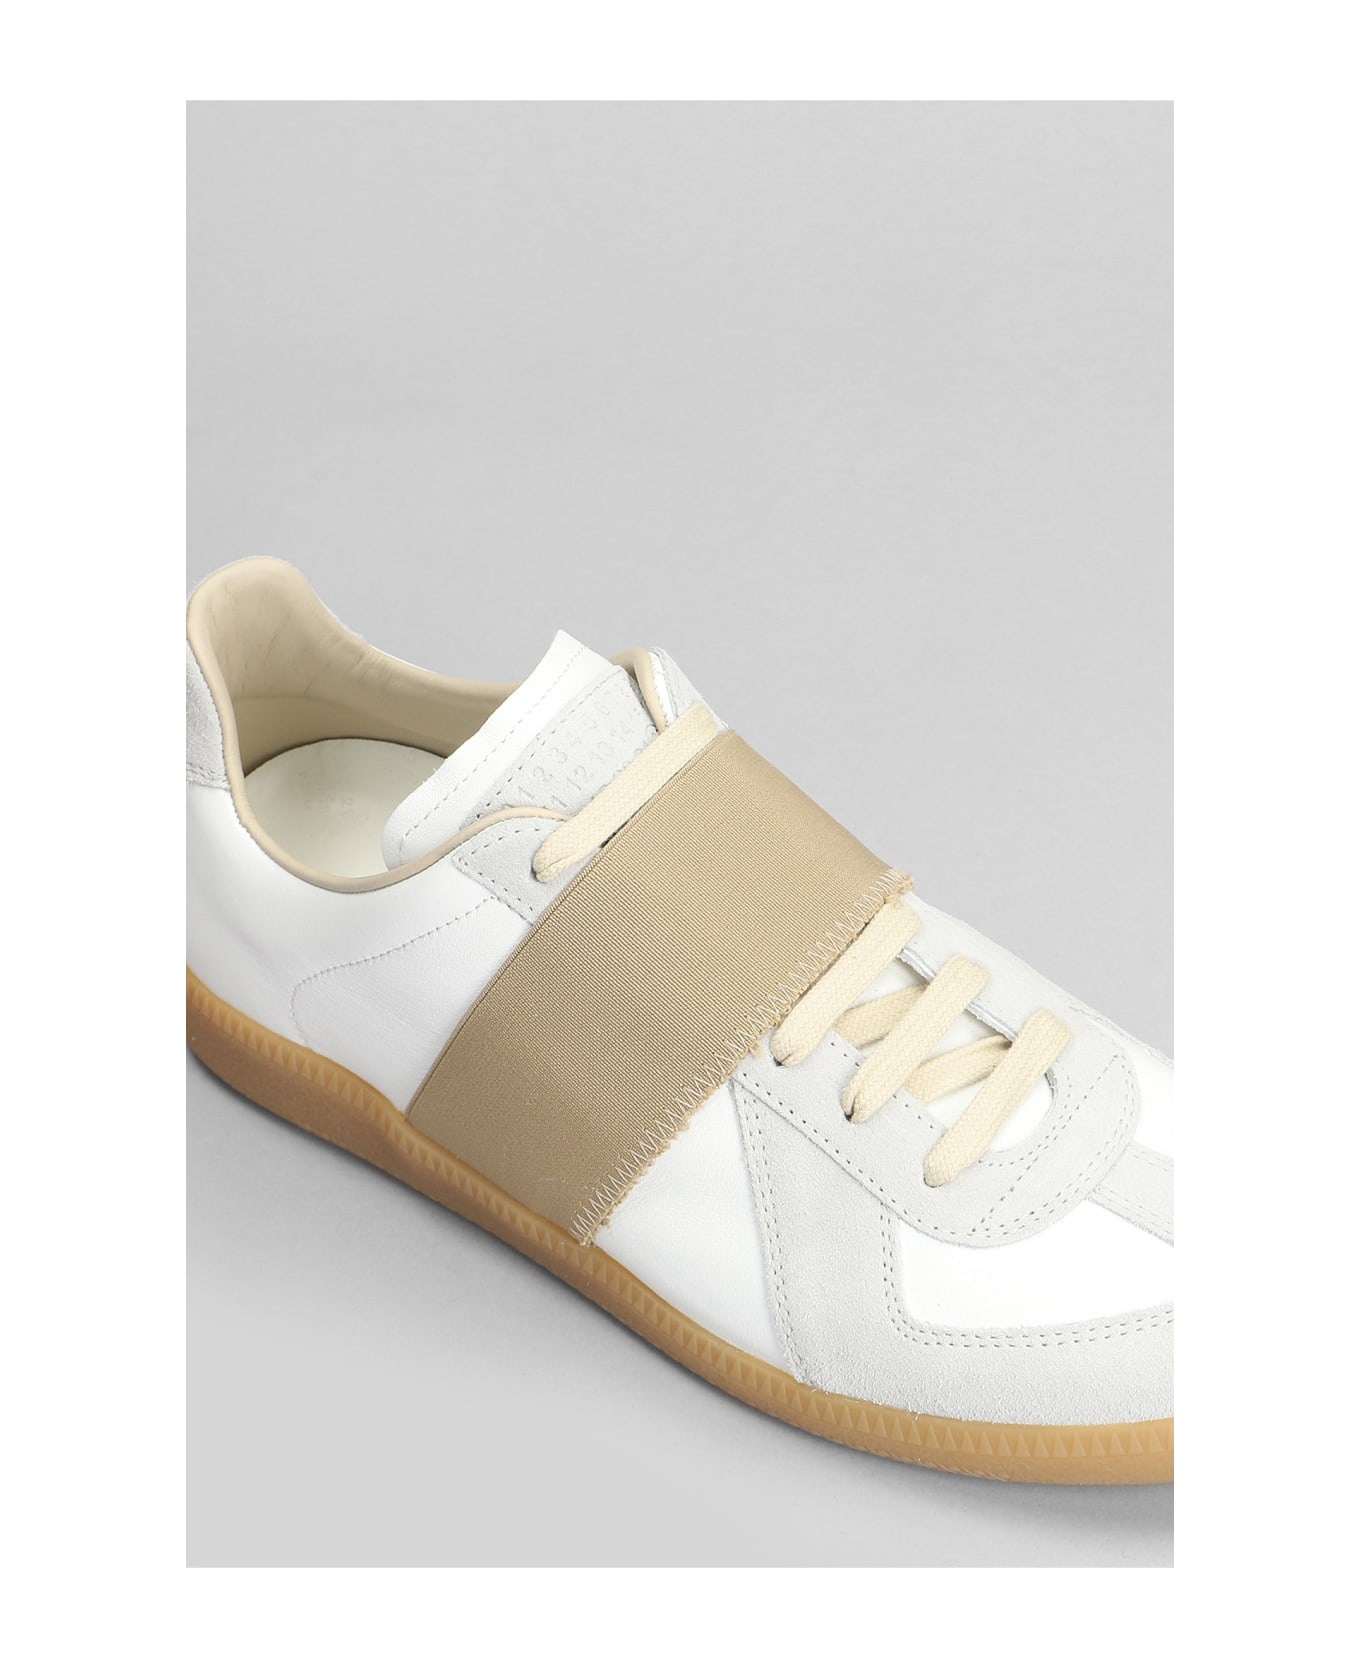 Replica Sneakers In White Suede And Leather - 5